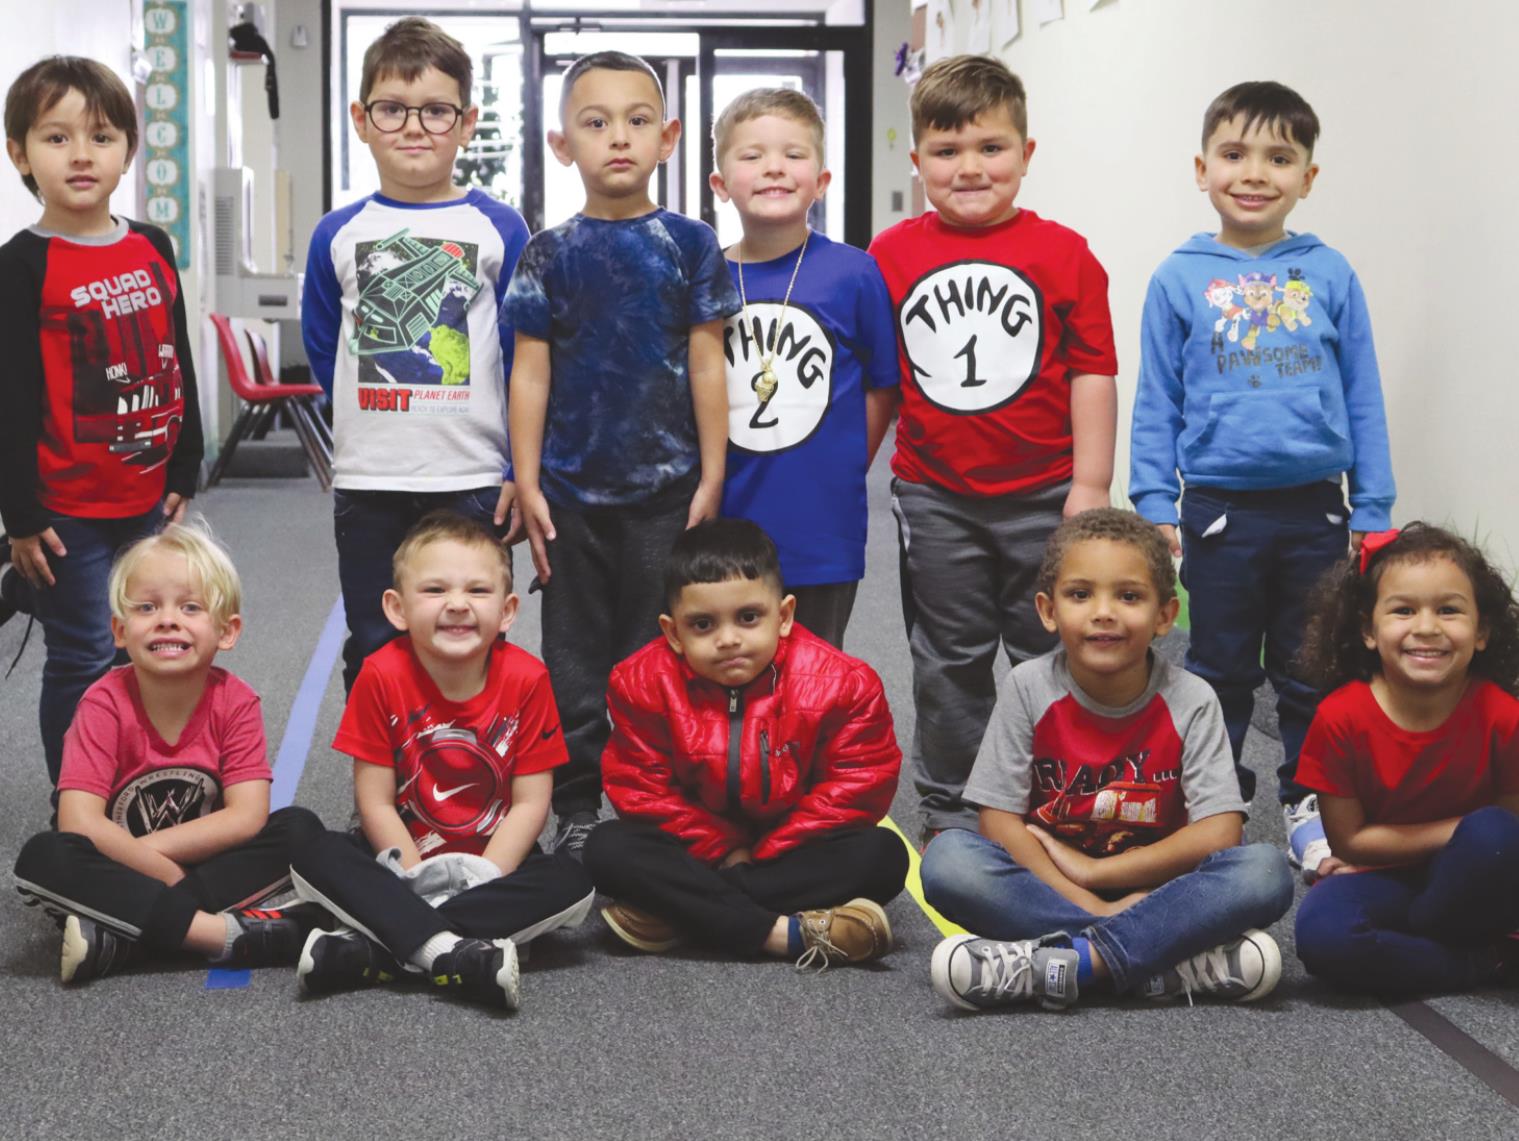 Pictured are members of Amber Hunt’s PM Pre-K class who wore red and blue Thursday. Front row from left is Kol Burd, Raylon Hudson, Jose Camarillo, Knoxx Keel, Rilee Robinson. Back row is Bruno Cordova, Kai Kubitscheck, Israel Castro, Jackson Burrows, Hudson Burrows and Alex Pena. Leanna Cook/WDN